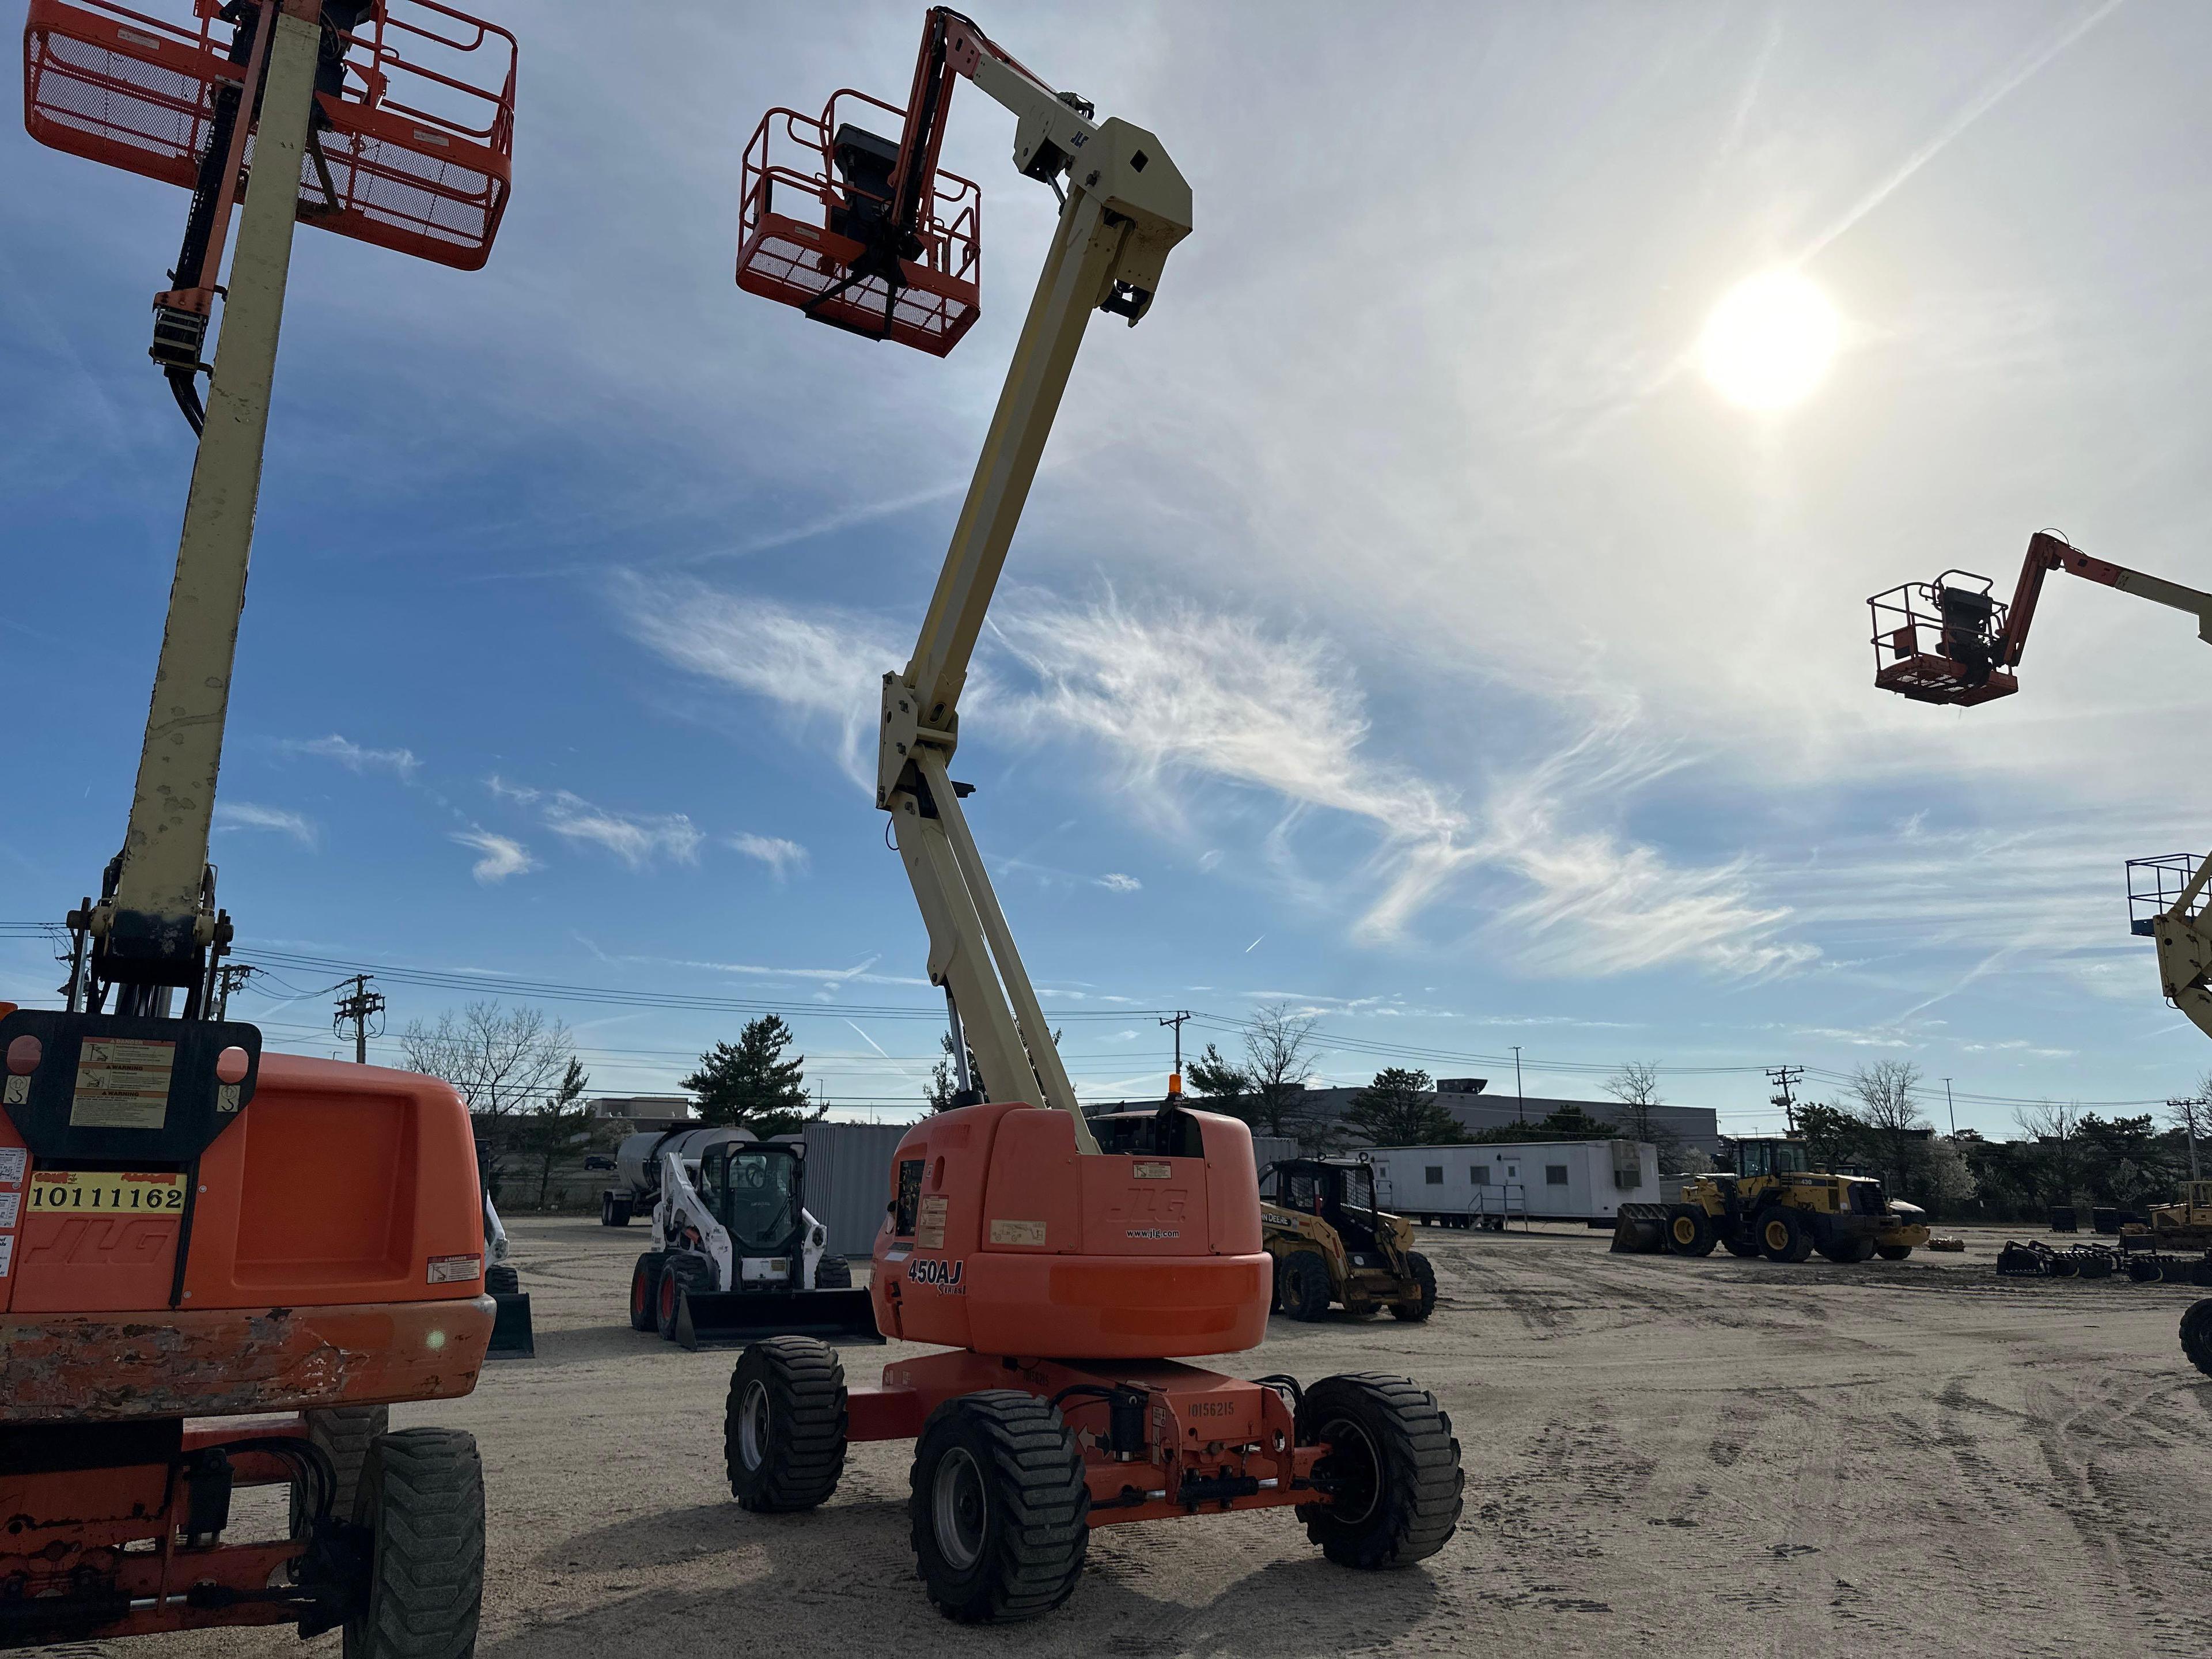 2013 JLG 450AJ BOOM LIFT SN:300173672 4x4, powered by diesel engine, equipped with 45ft. Platform